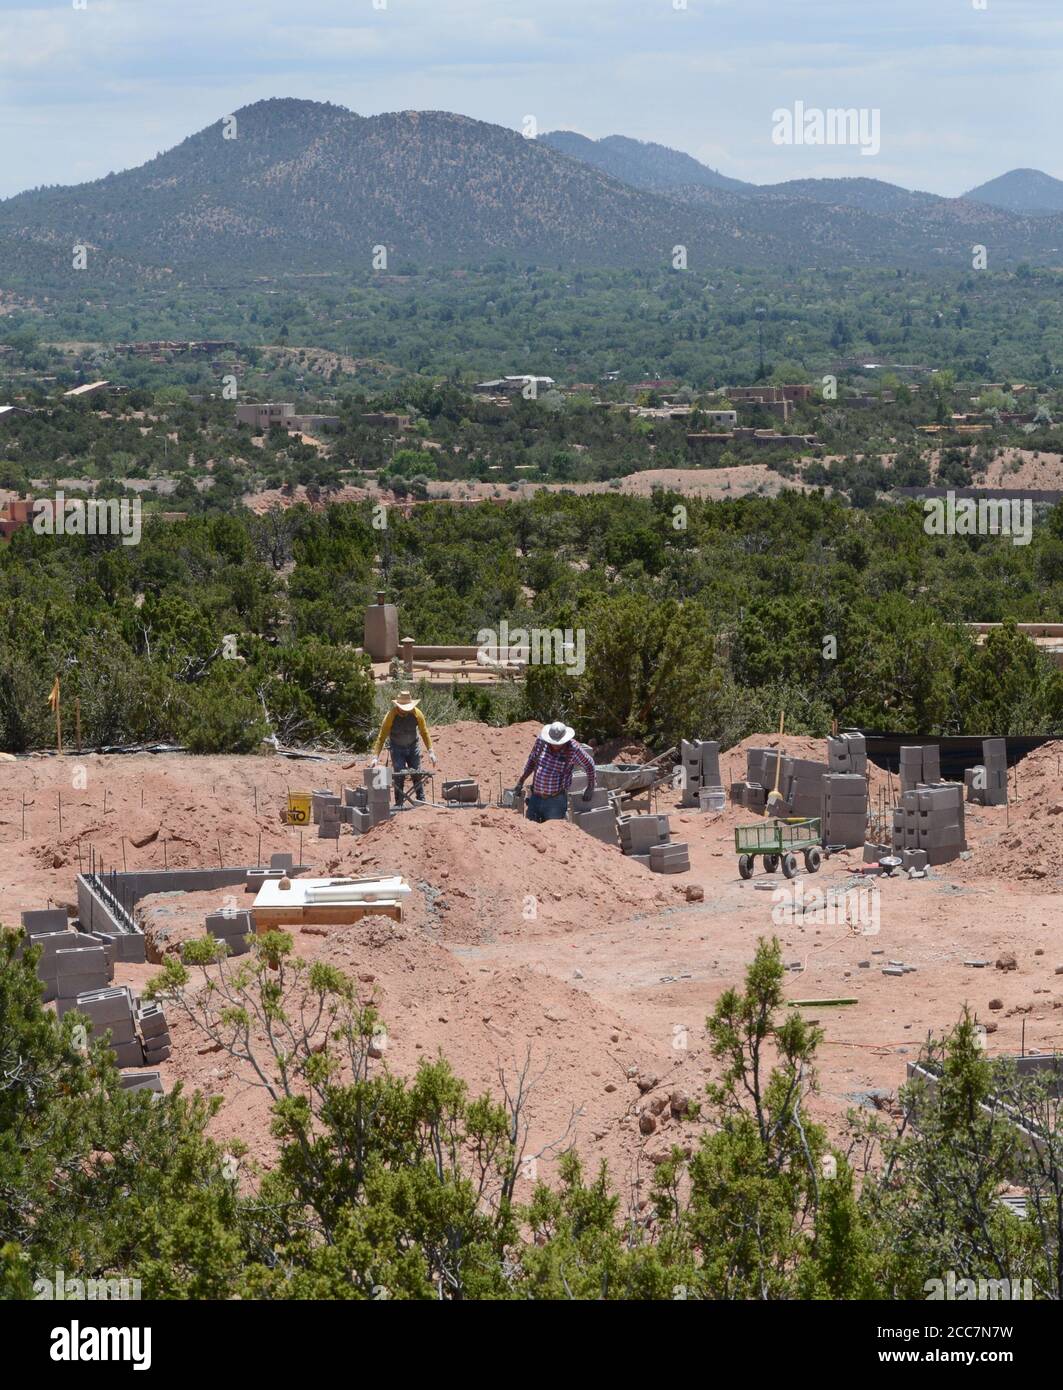 Construction workers lay a cinder block foundation for a new home being built overlooking Santa Fe, New Mexico USA. Stock Photo